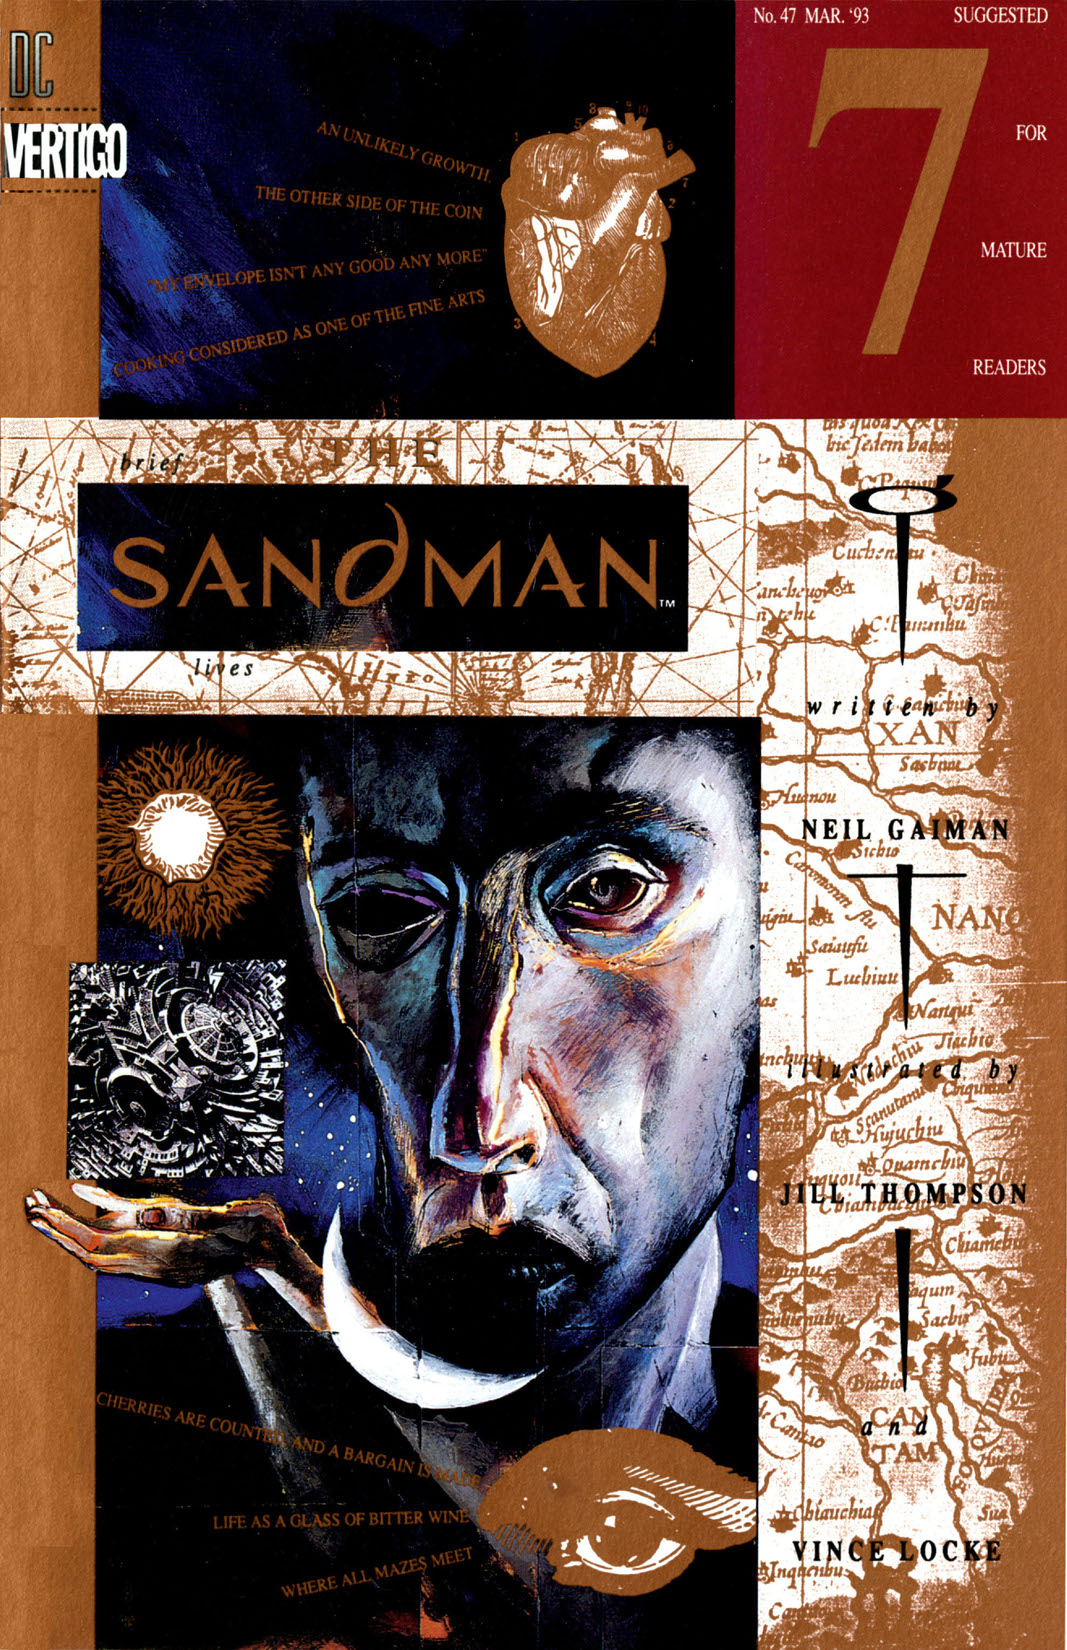 The Sandman #47 preview images